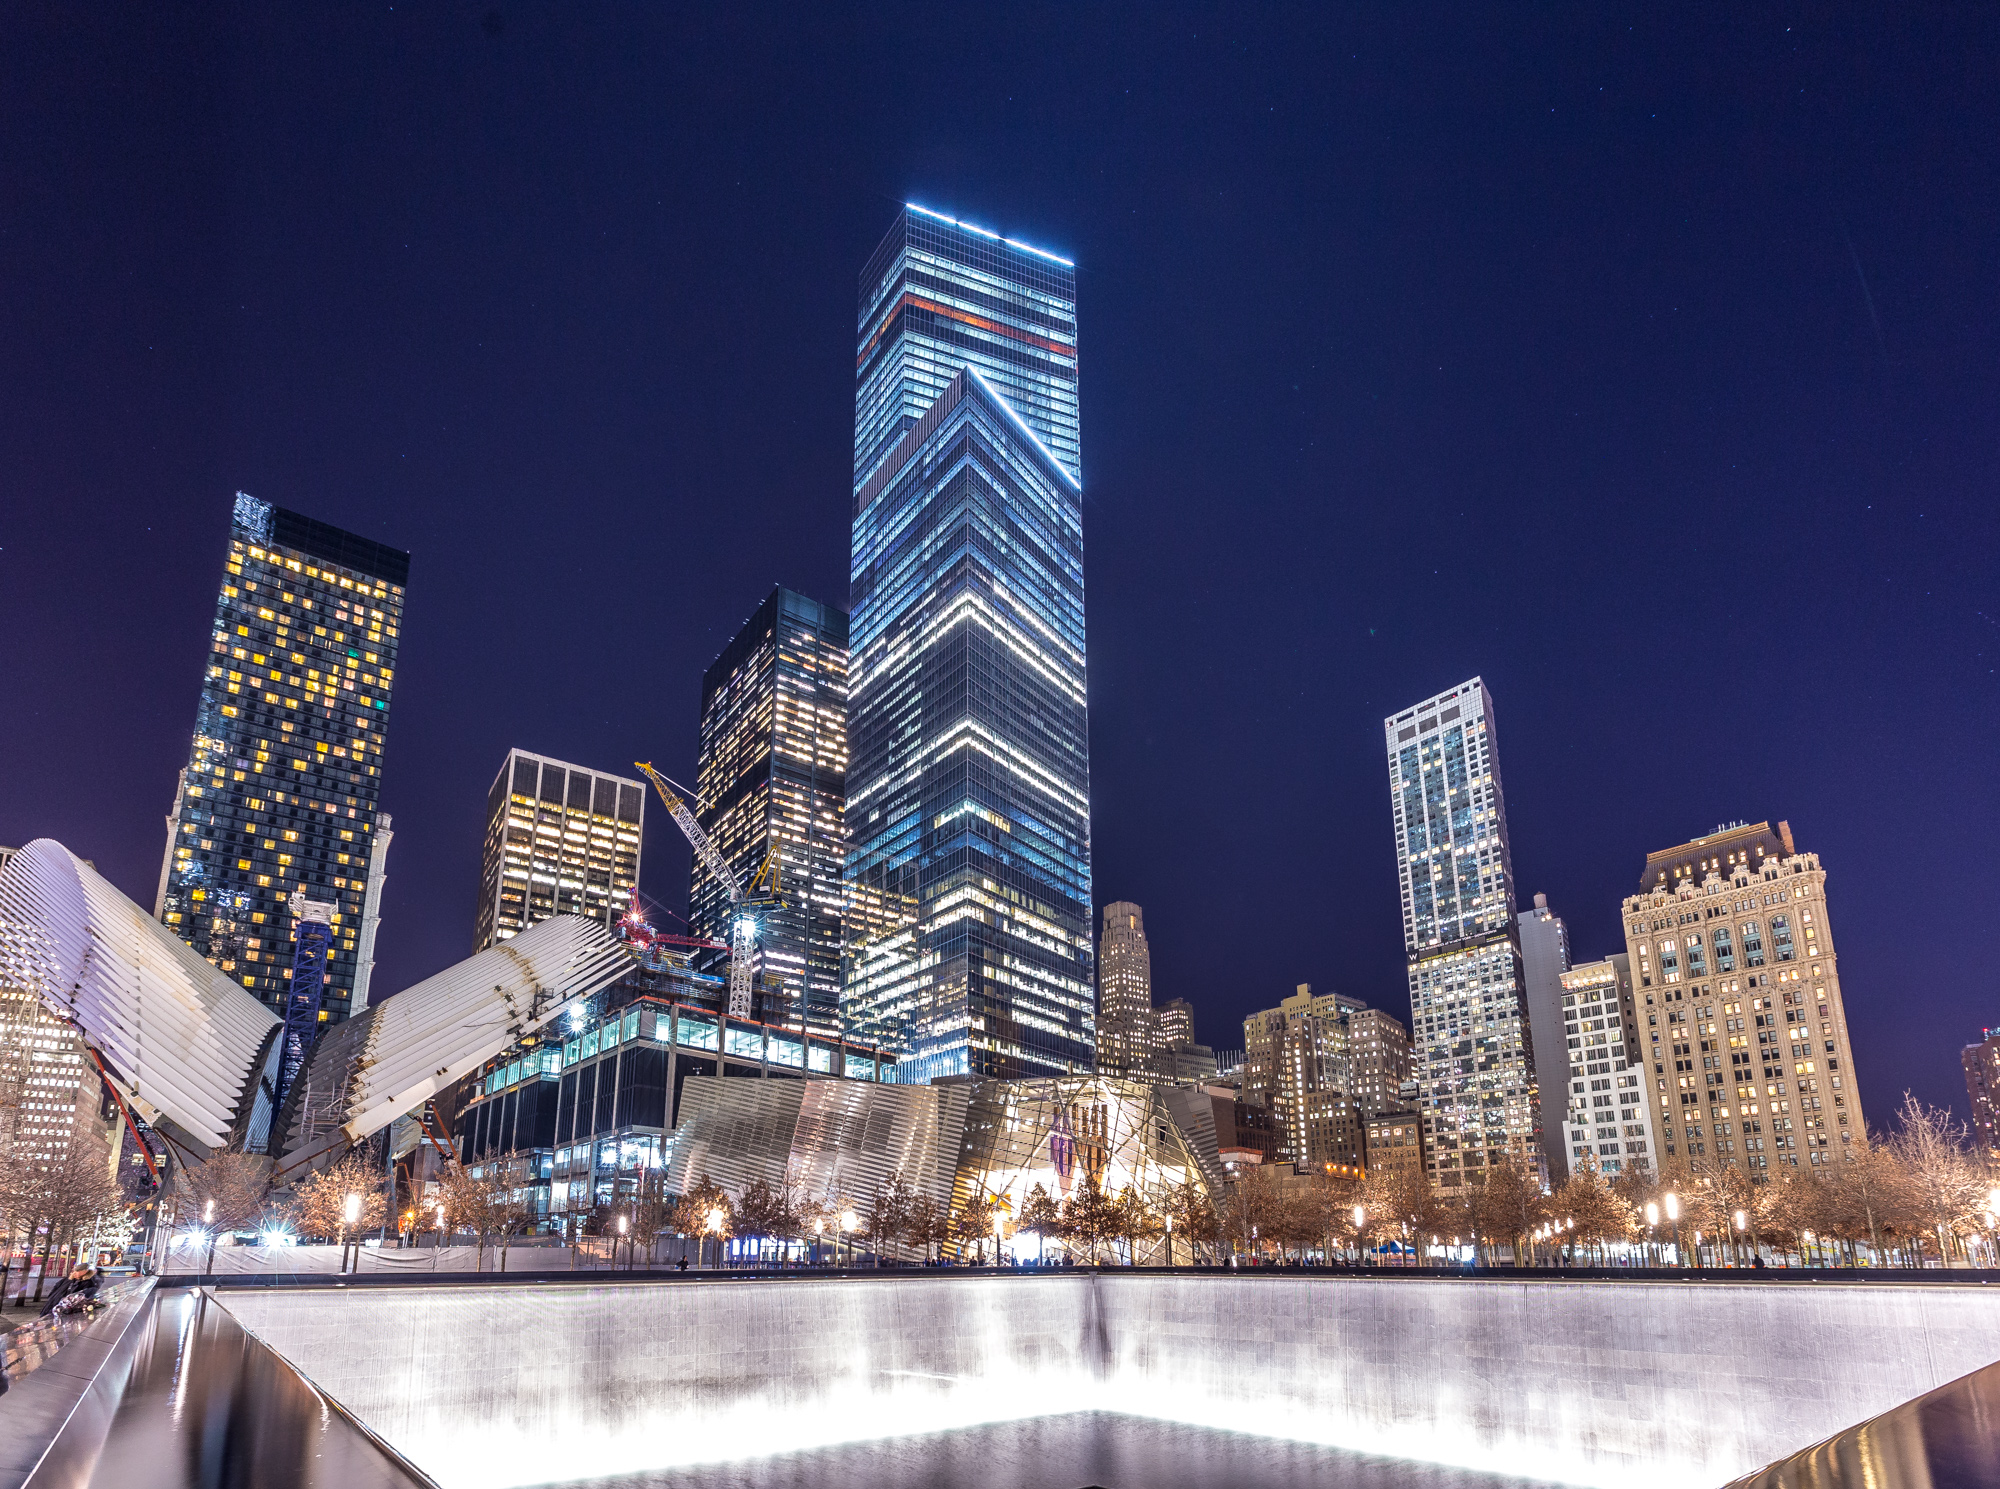 The skyscrapers and buildings at the World Trade Center site. In the foreground is a large memorial fountain.